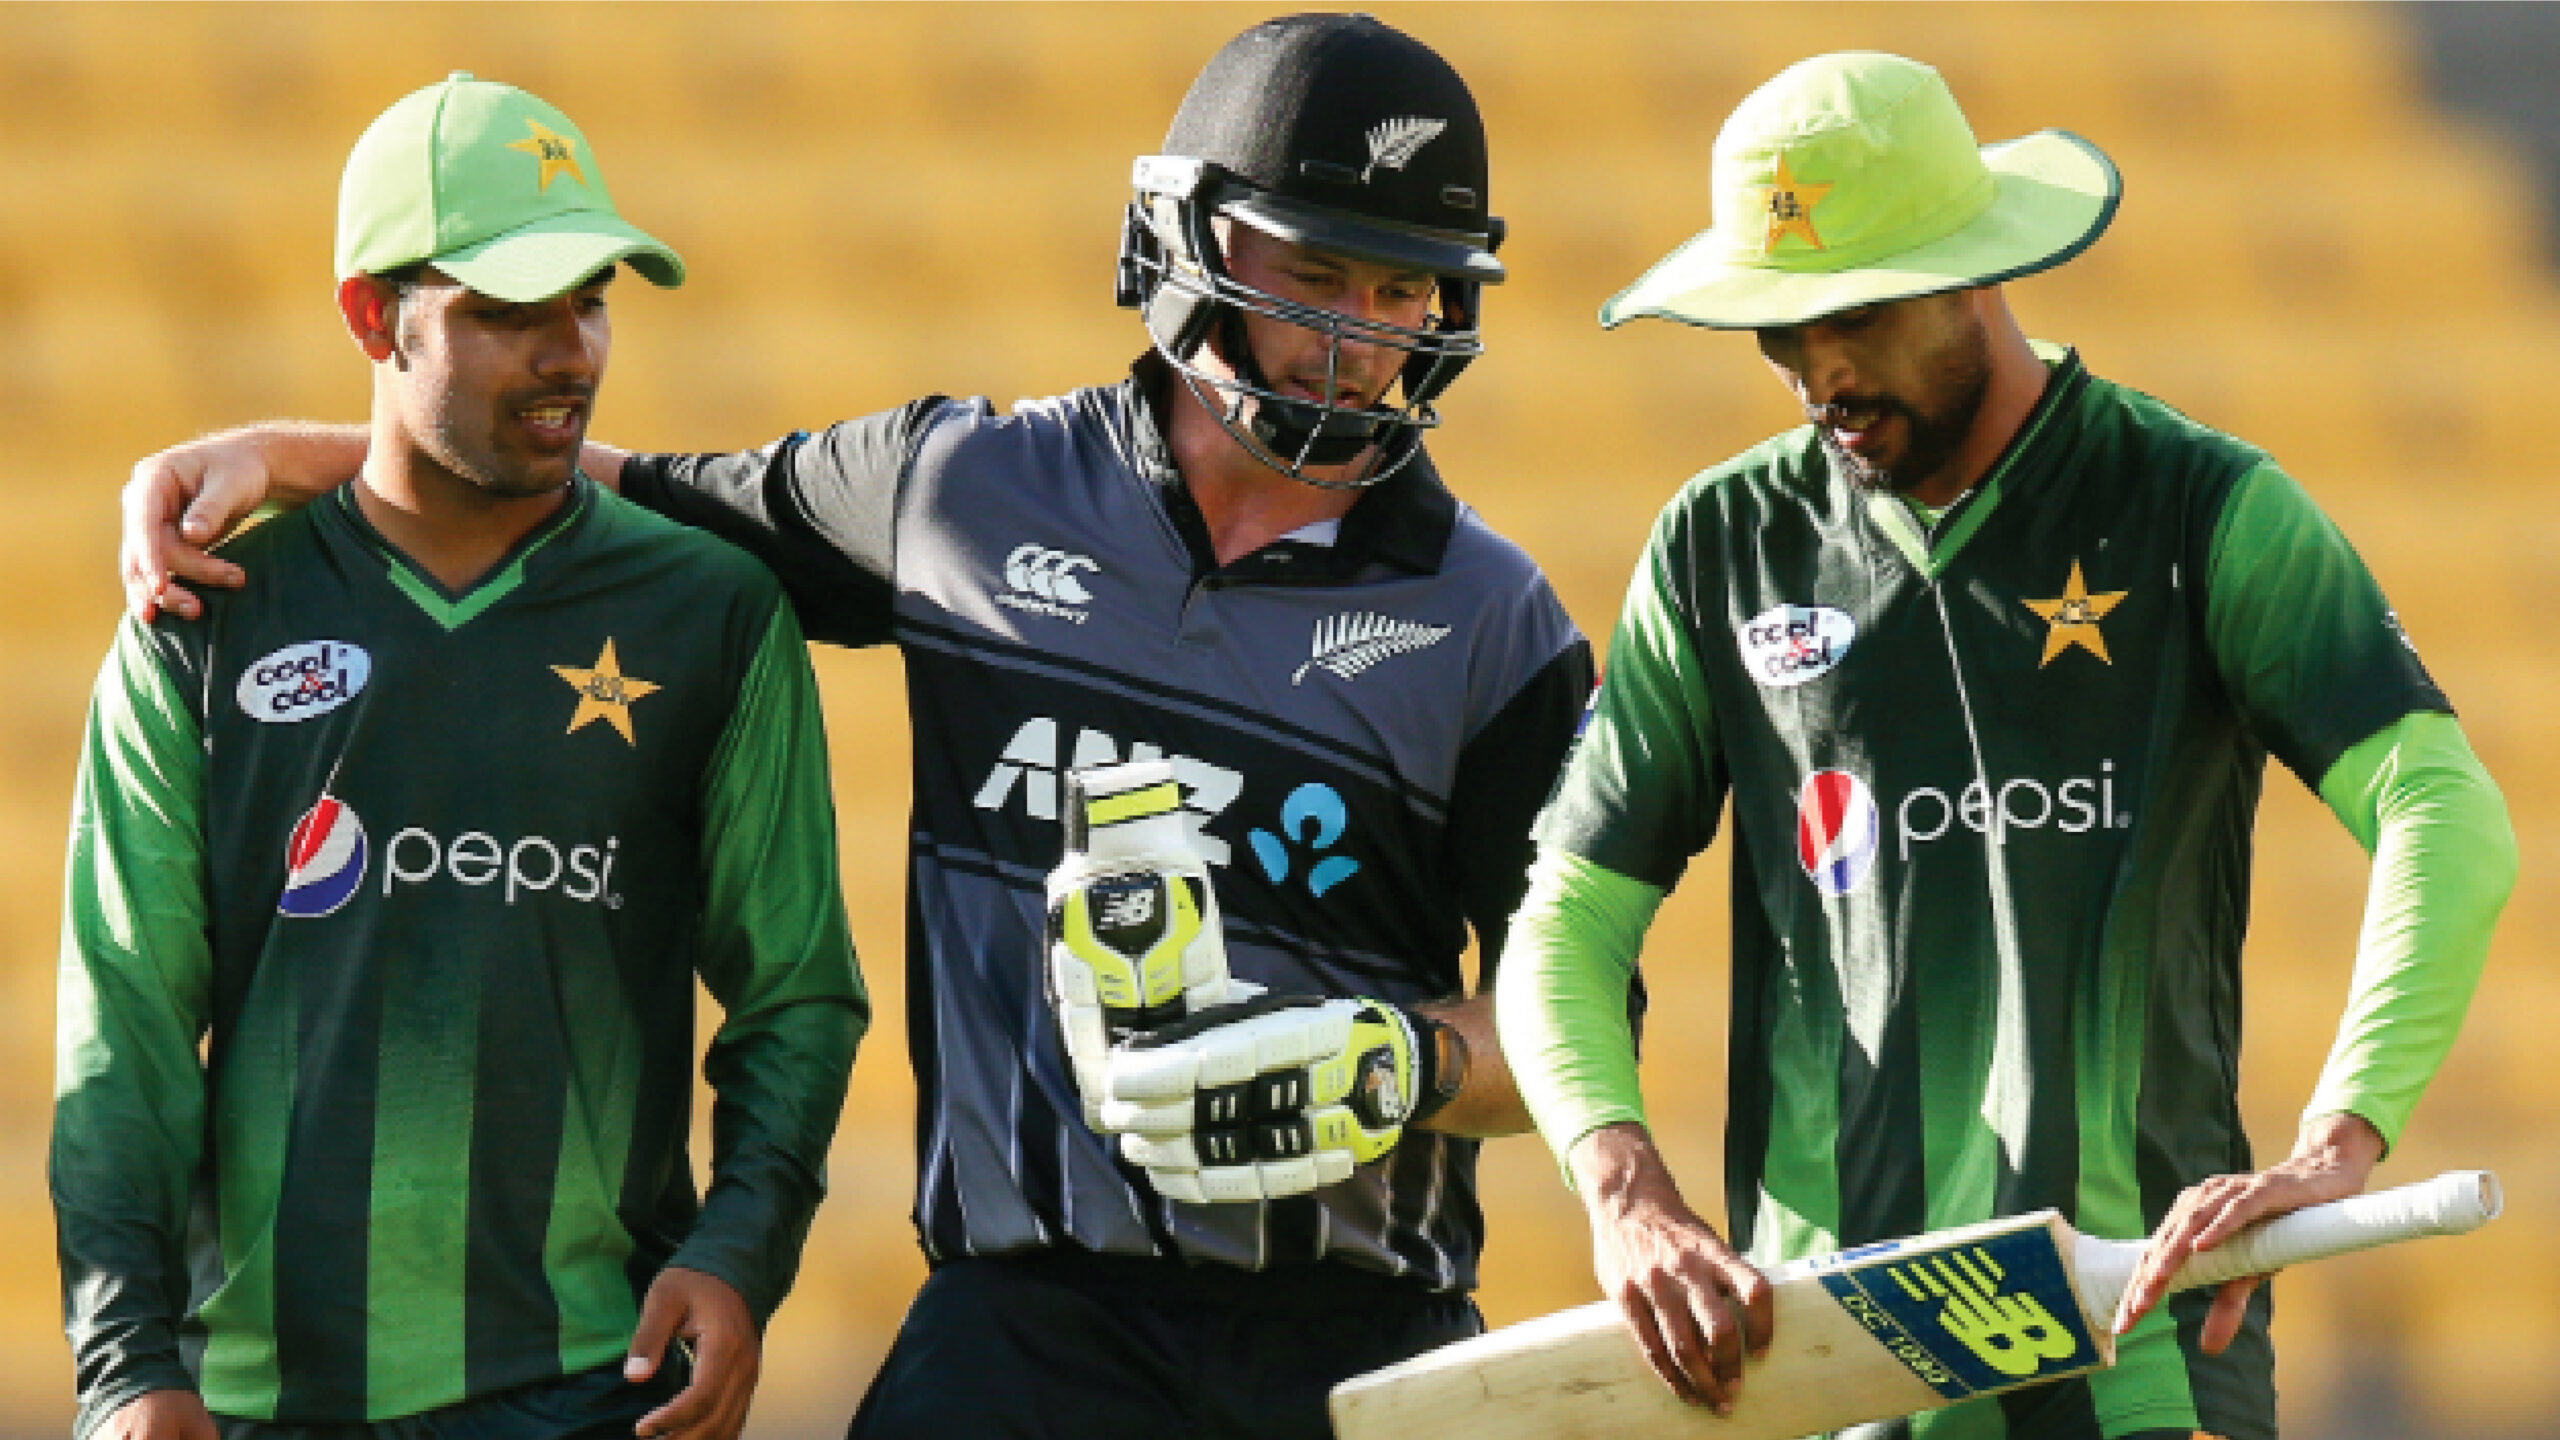 New Zealand to tour Pakistan in September